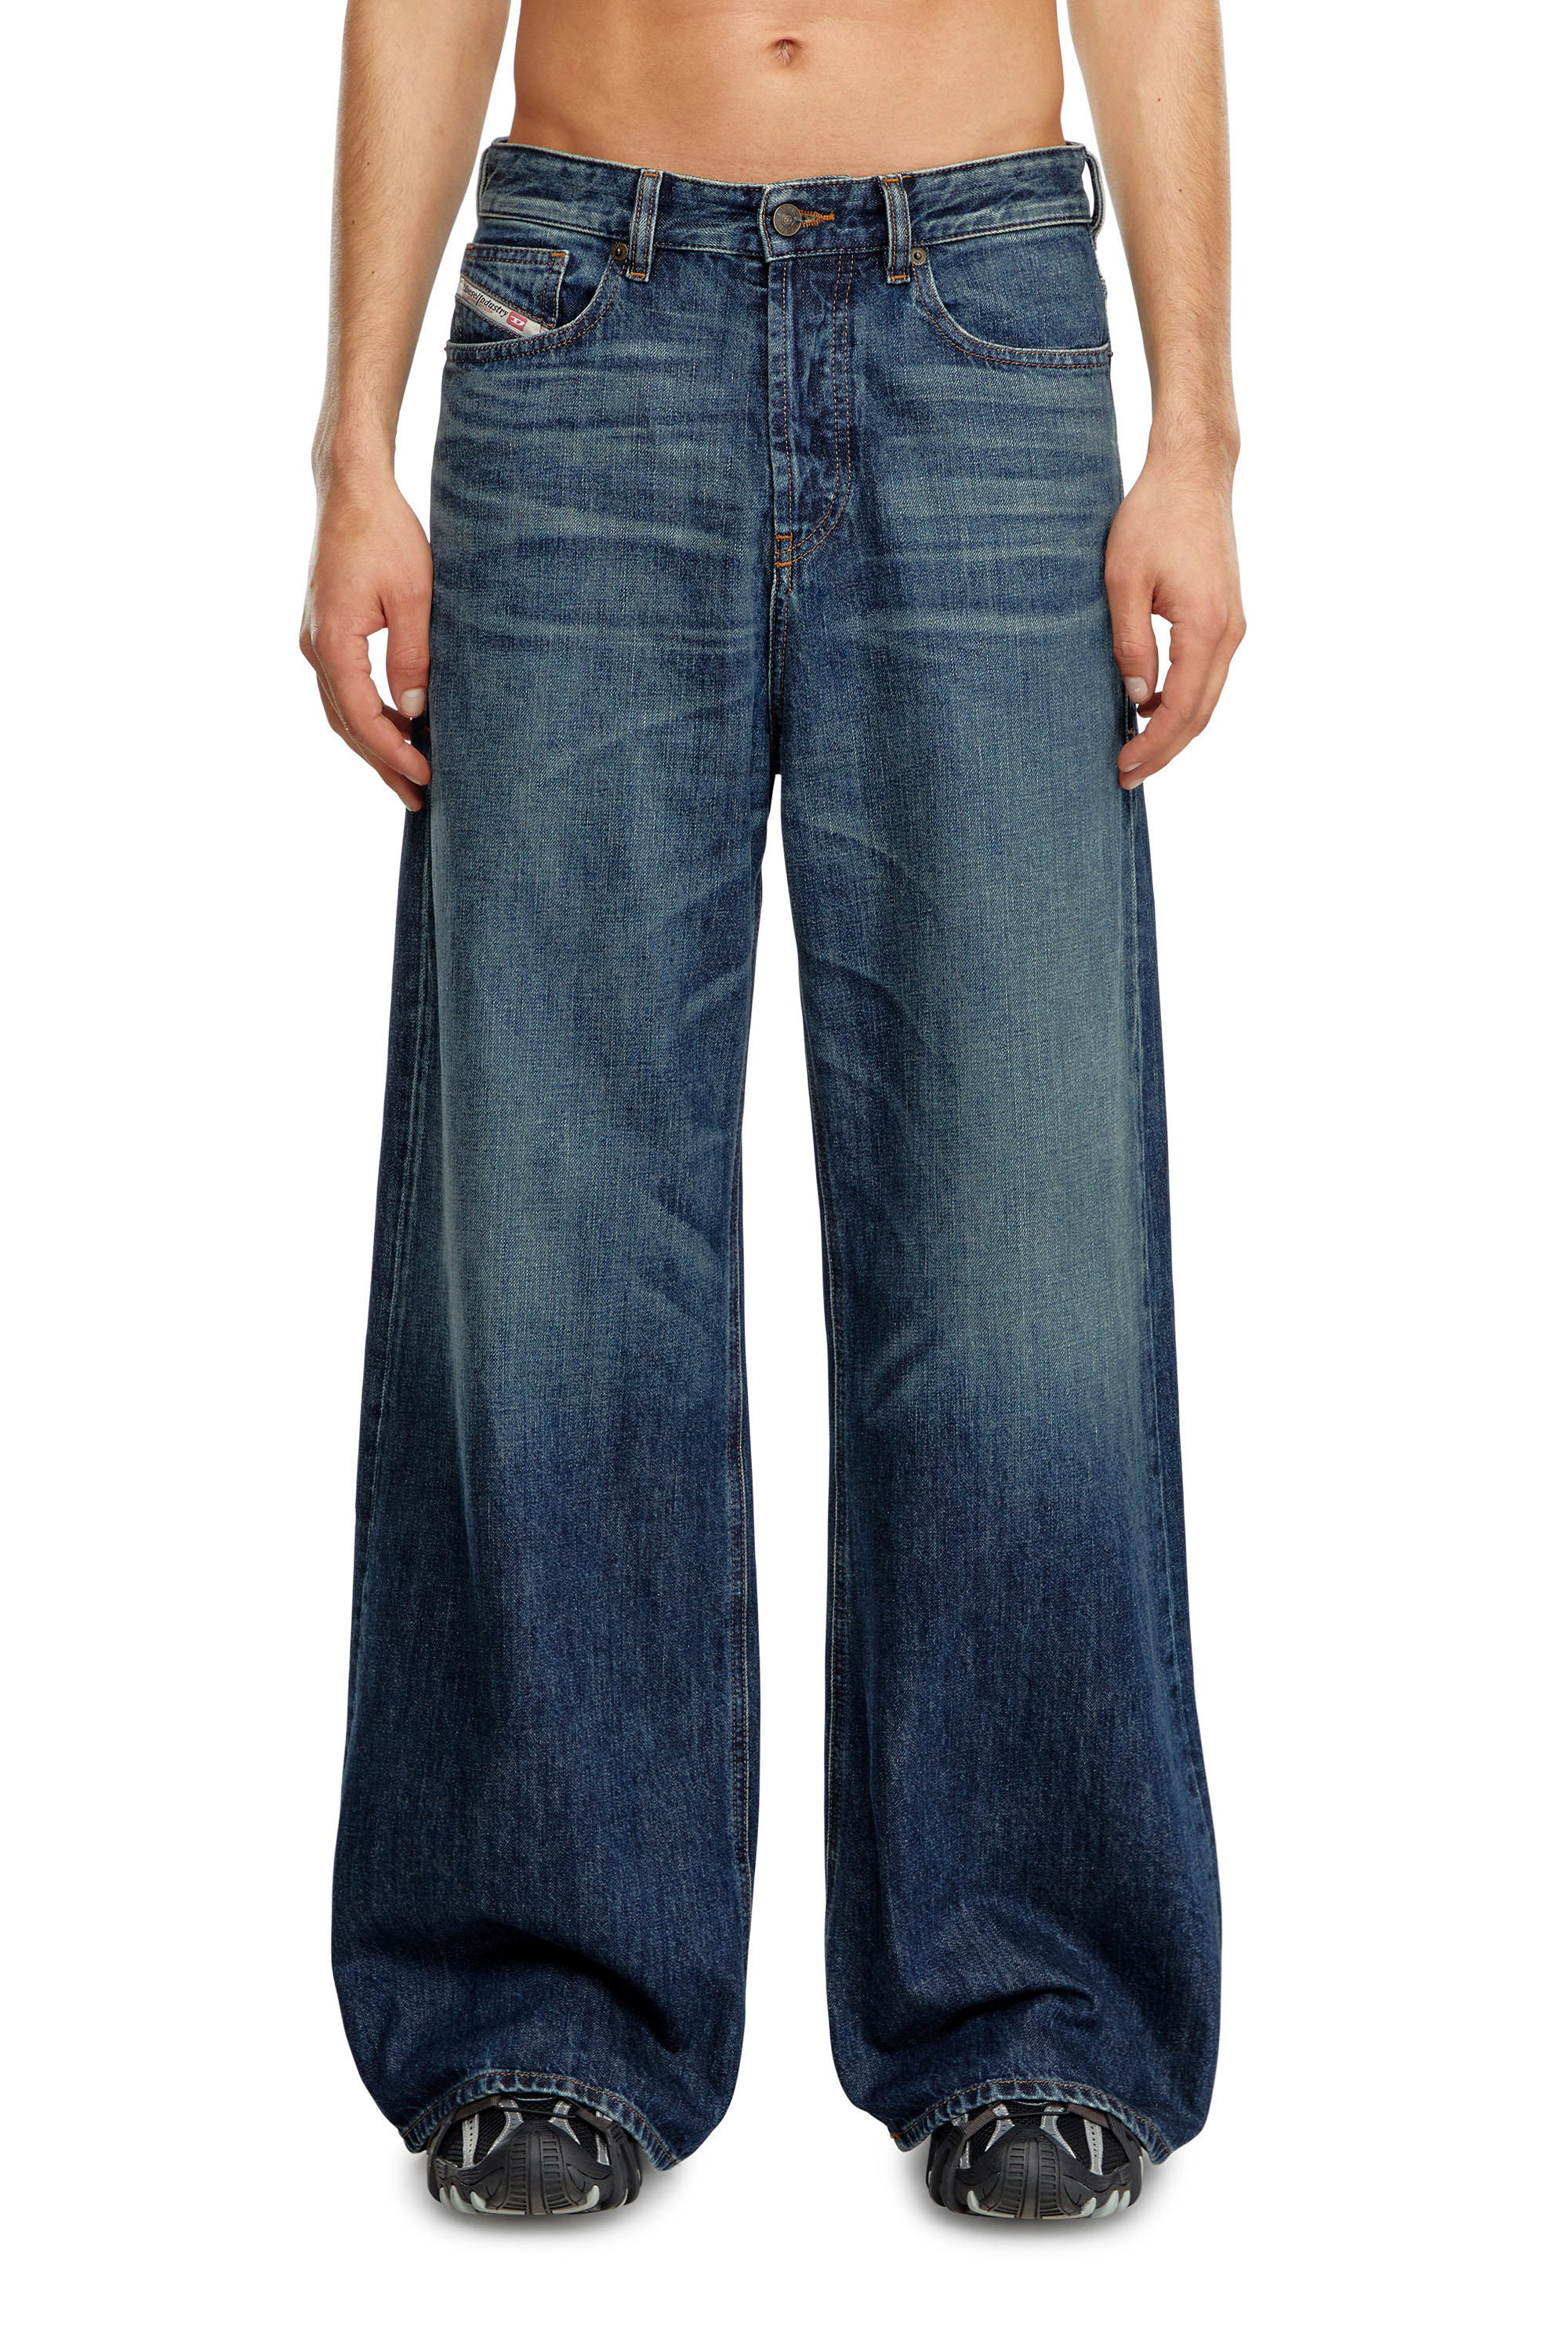 Diesel - Straight Jeans 1996 D-Sire 09H59, Mujer Straight Jeans - 1996 D-Sire in Azul marino - Image 6